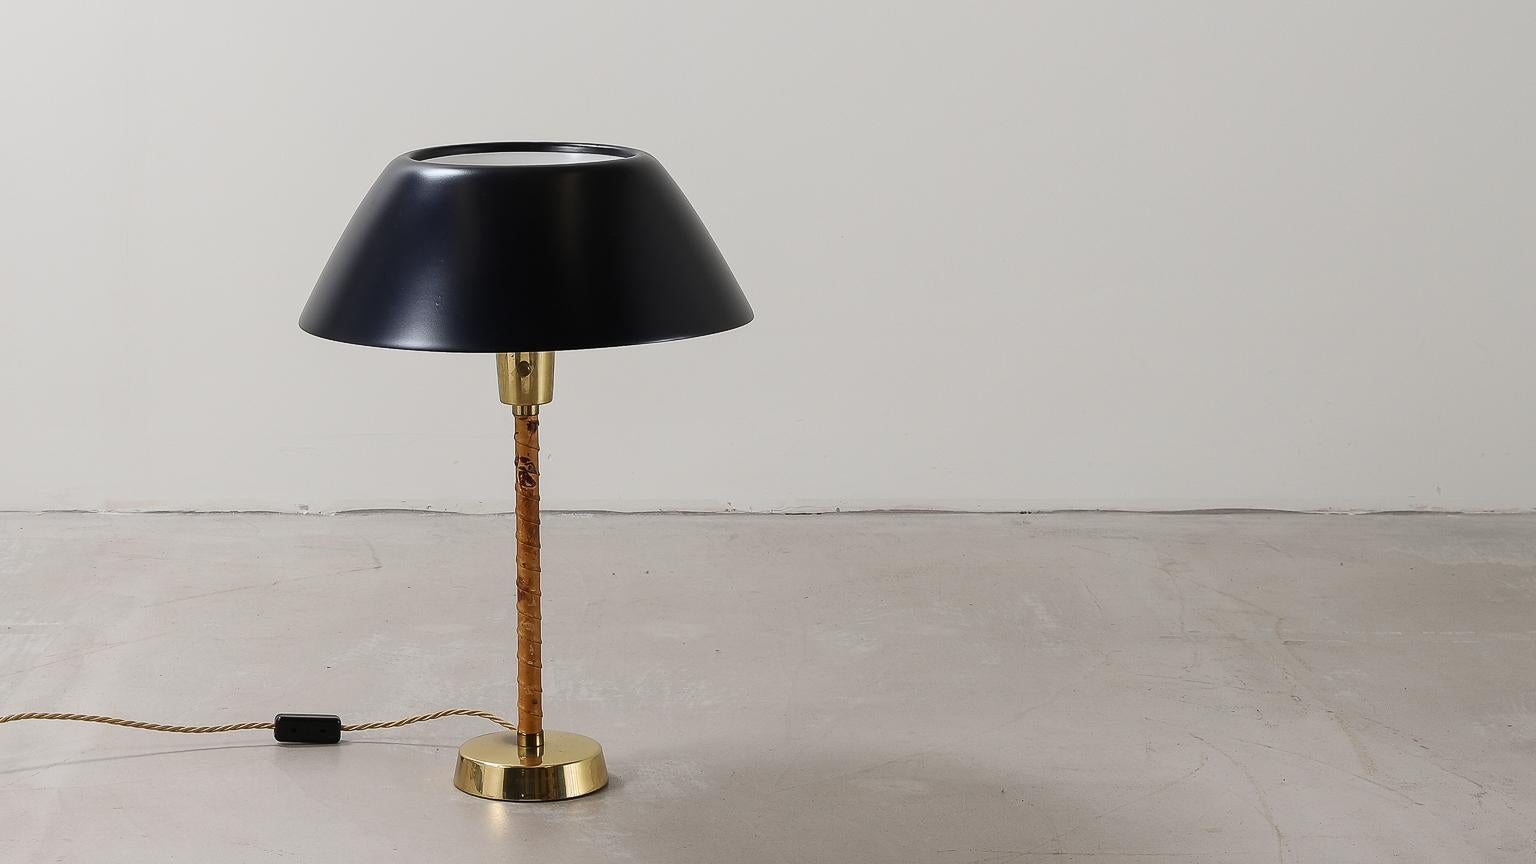 Senator table lamp by Lisa Johansson-Pape for Orno, 1947 in brass and lacquered metal with twisted original leather base.

Wired for U.K. 

Lisa Johansson-Pape (1907–1989) was a Finnish designer, most known for her lighting designs but also